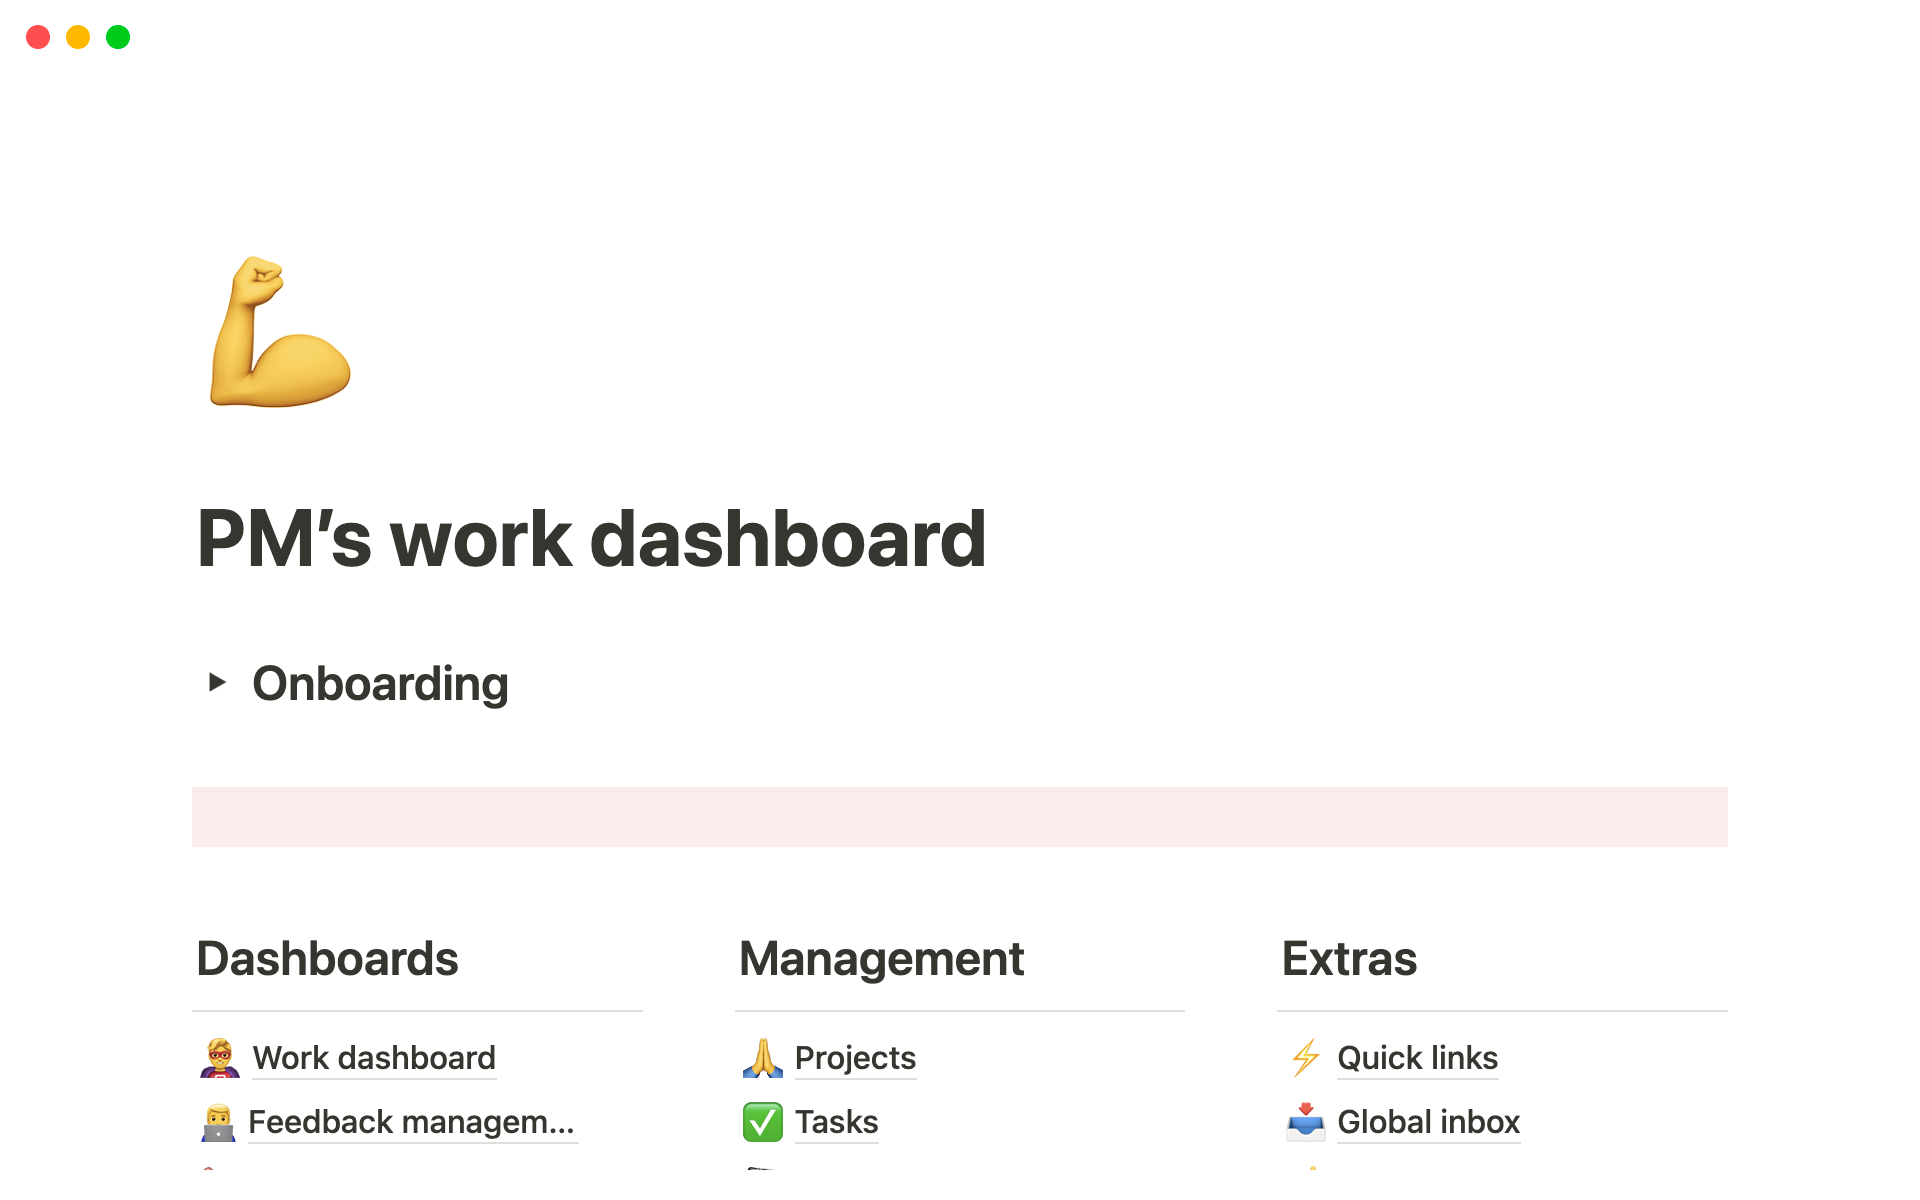 PM's work dashboard helps to take full control over your day-to-day operations with tools to manage projects, tasks, meetings, and feedback all in one place.